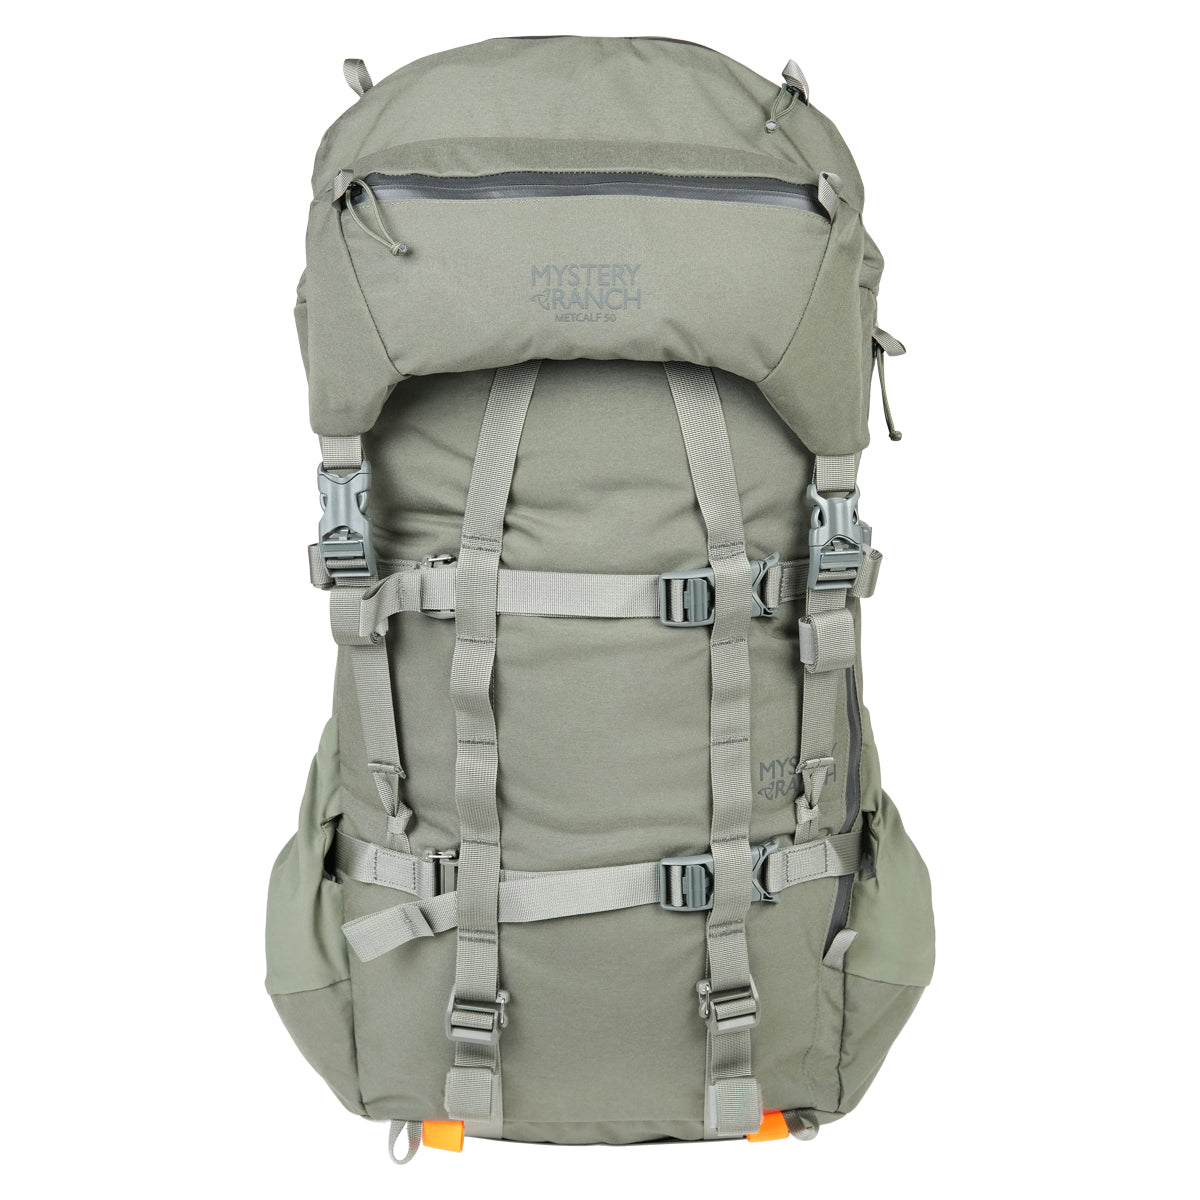 Mystery Ranch Metcalf 50 Backpack in Foliage by GOHUNT | Mystery Ranch - GOHUNT Shop